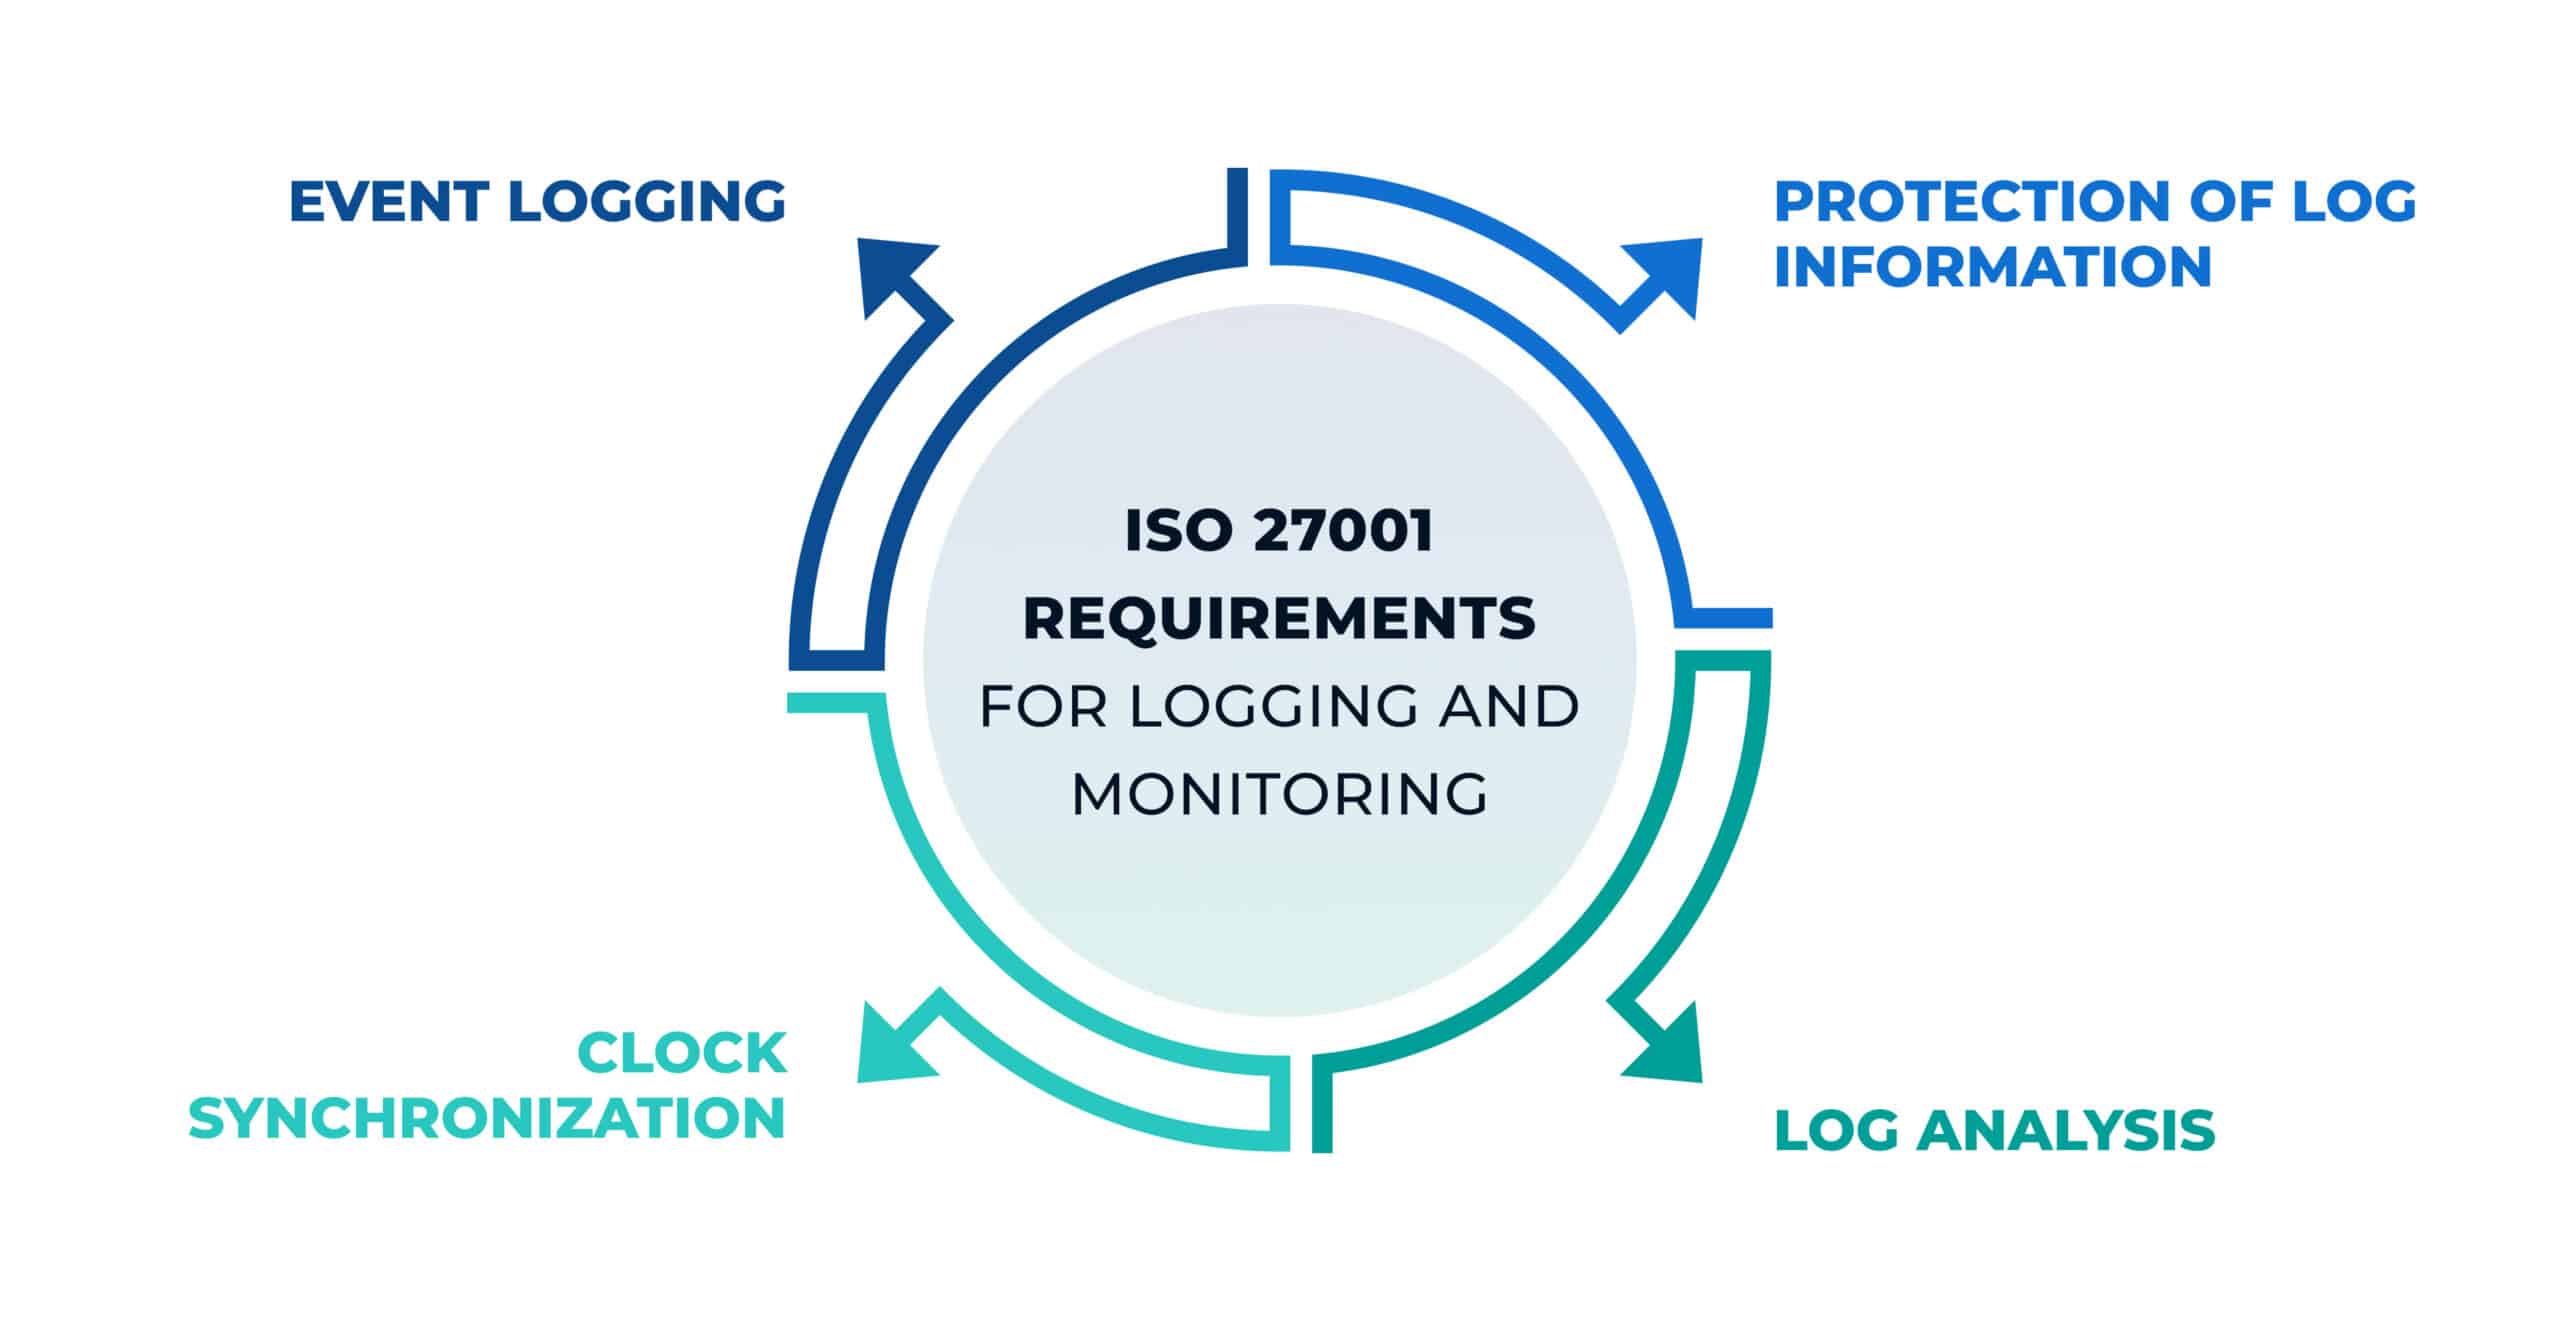 ISO 27001 logging: How to comply with A.8.15